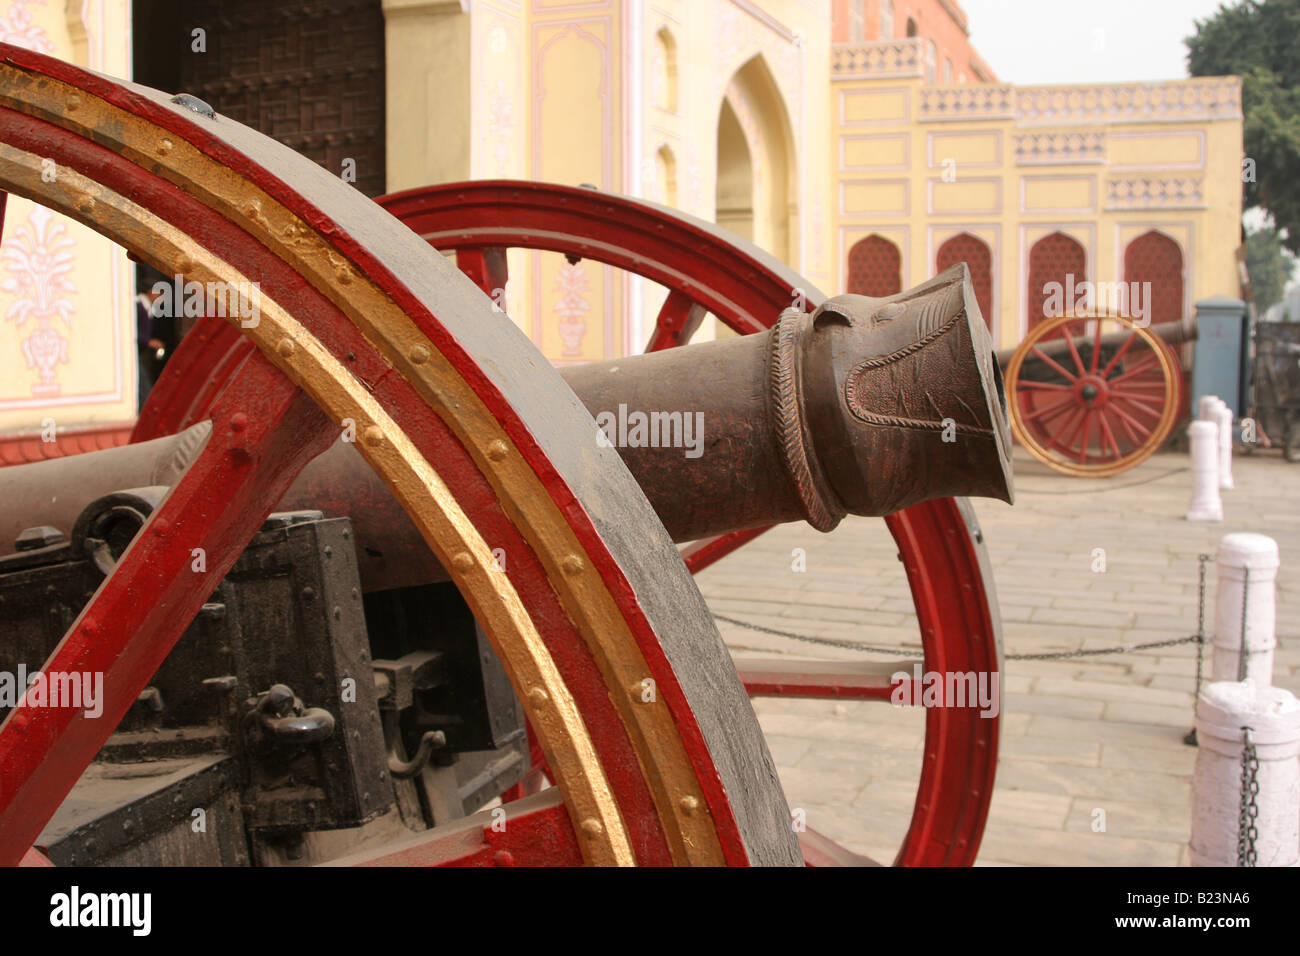 Decorated iron cannon in Jaipur Rajasthan India 2007 Stock Photo